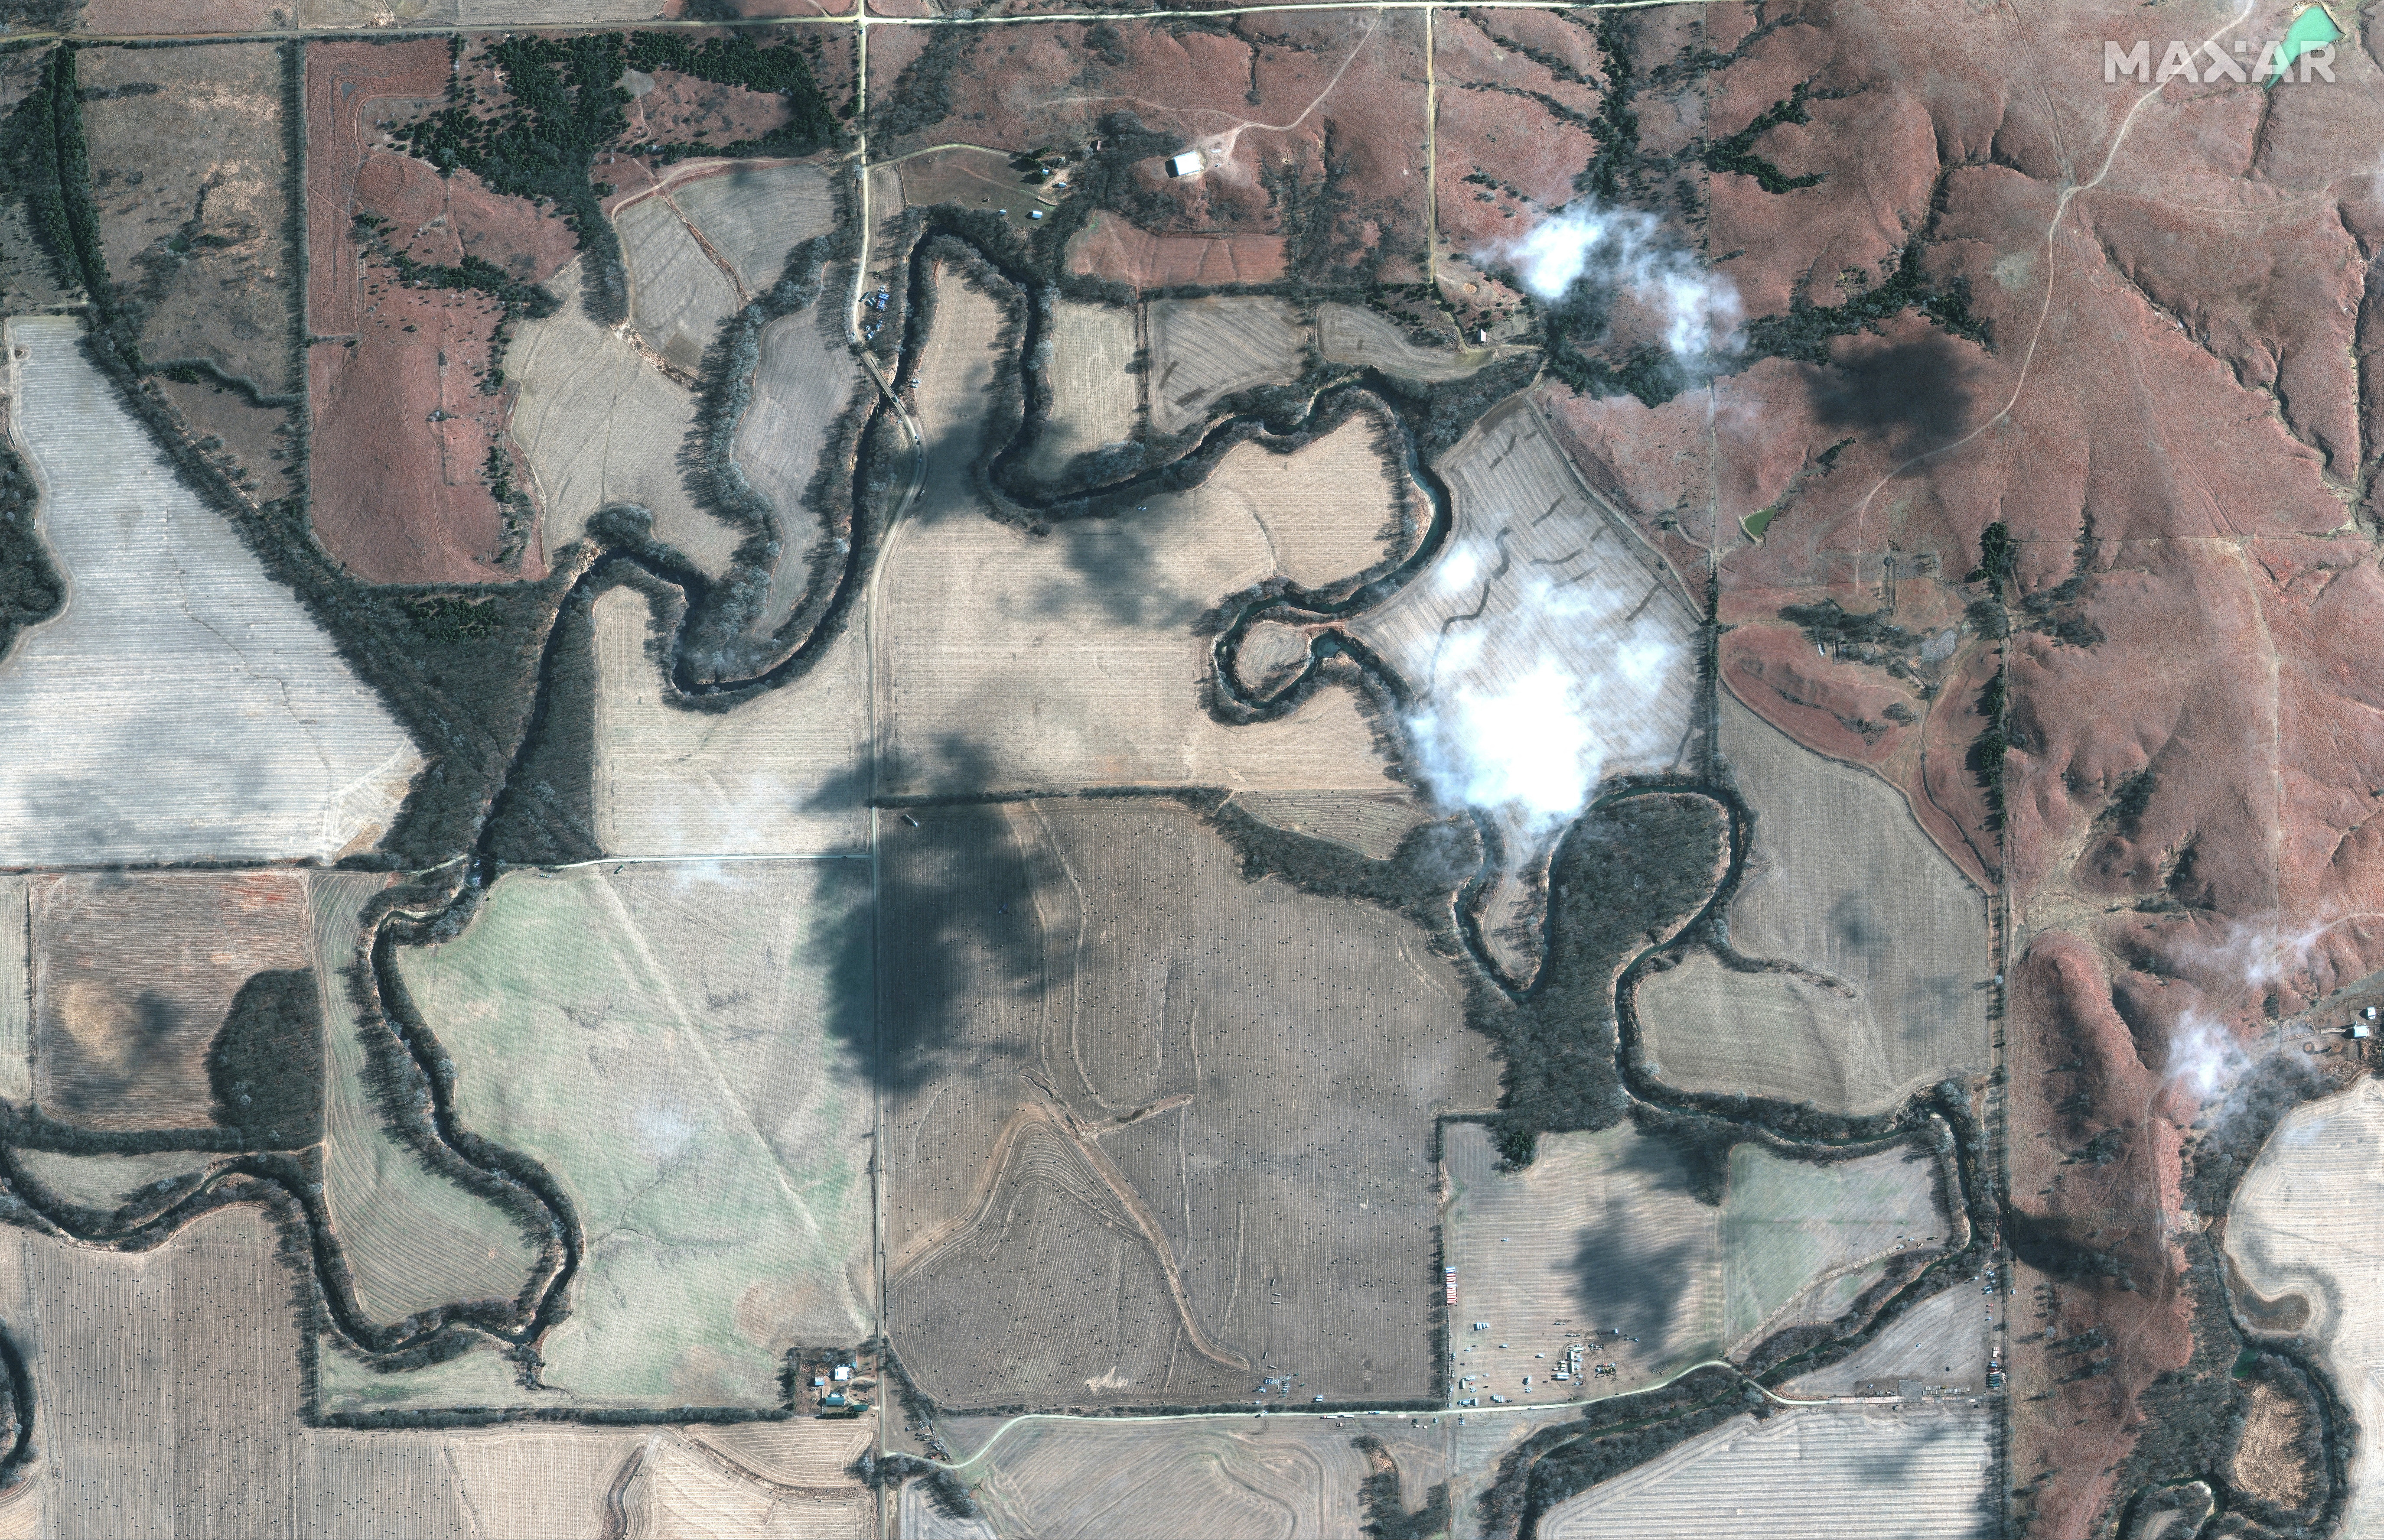 A satellite image shows an overview of the crude oil pipeline spill along Mill Creek, in Kansas